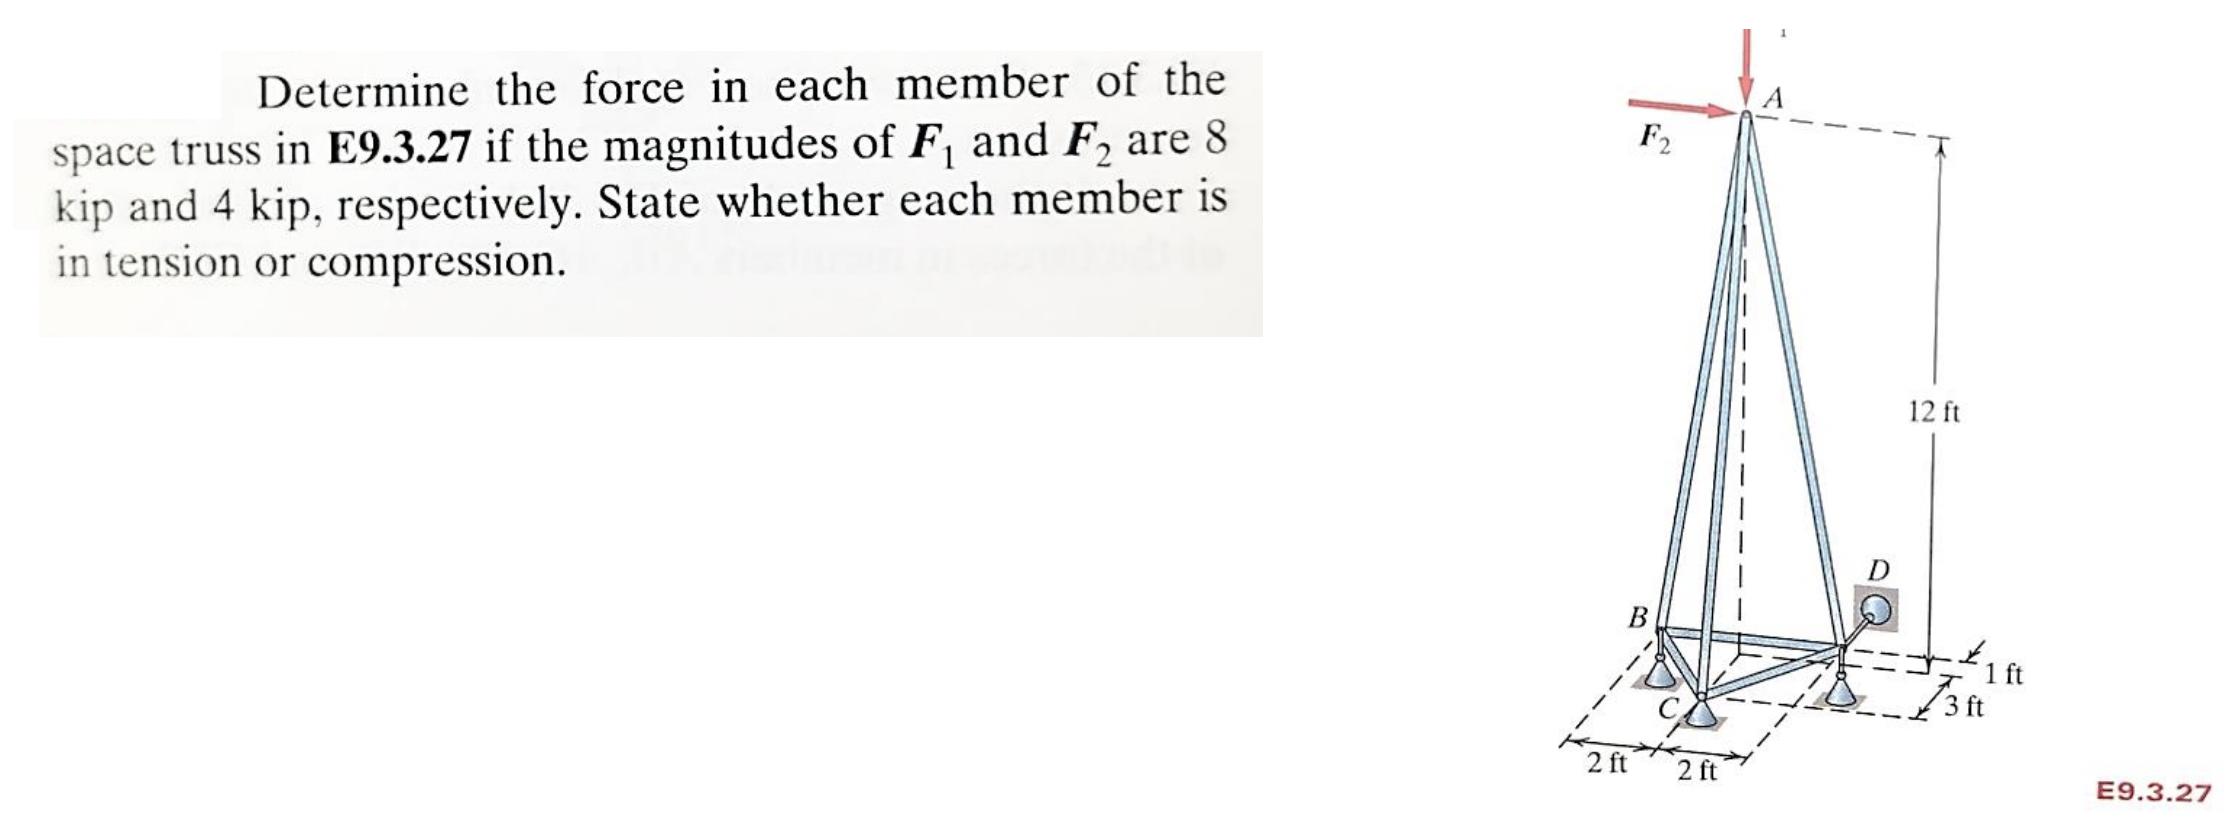 Determine the force in each member of the space truss in E9.3.27 if the magnitudes of F and F are 8 kip and 4